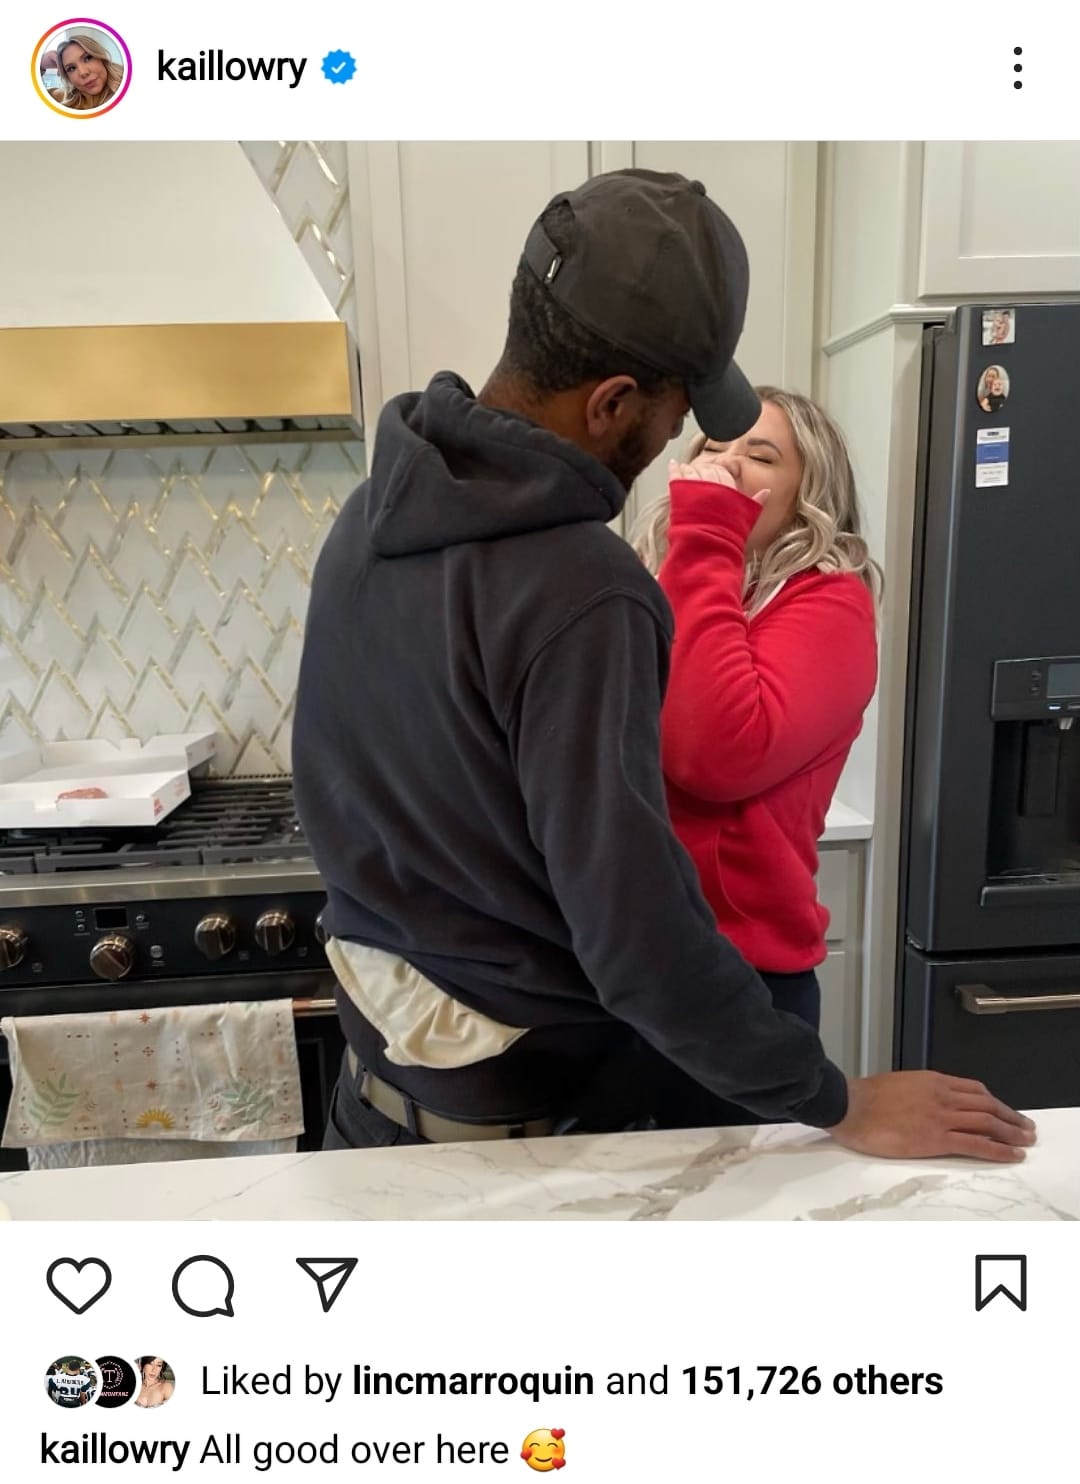 kail lowry continues to tease her new man with her fans